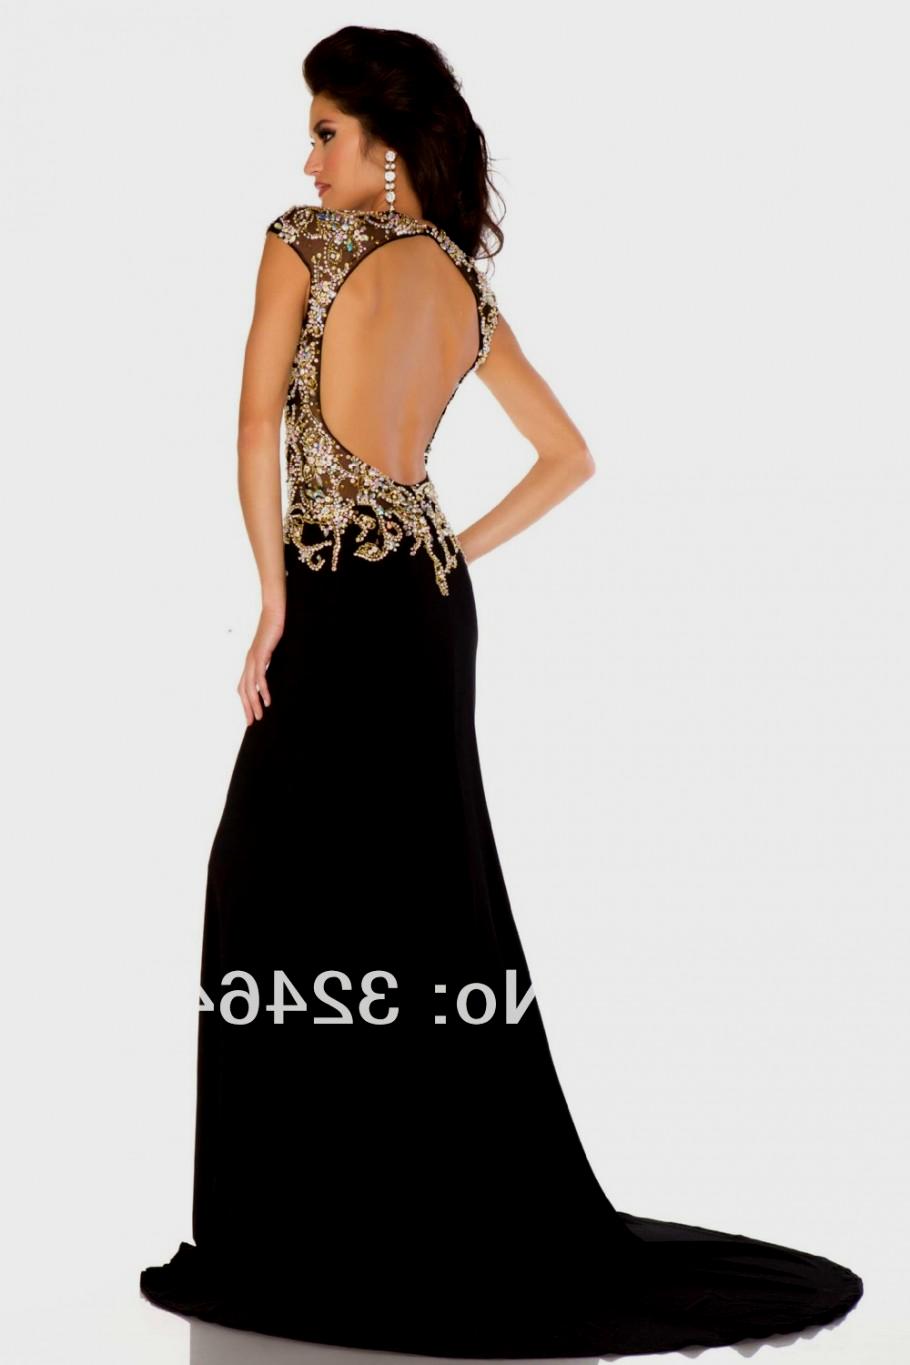 Black And Gold Dress Long : 2017-2018 Fashion Trend